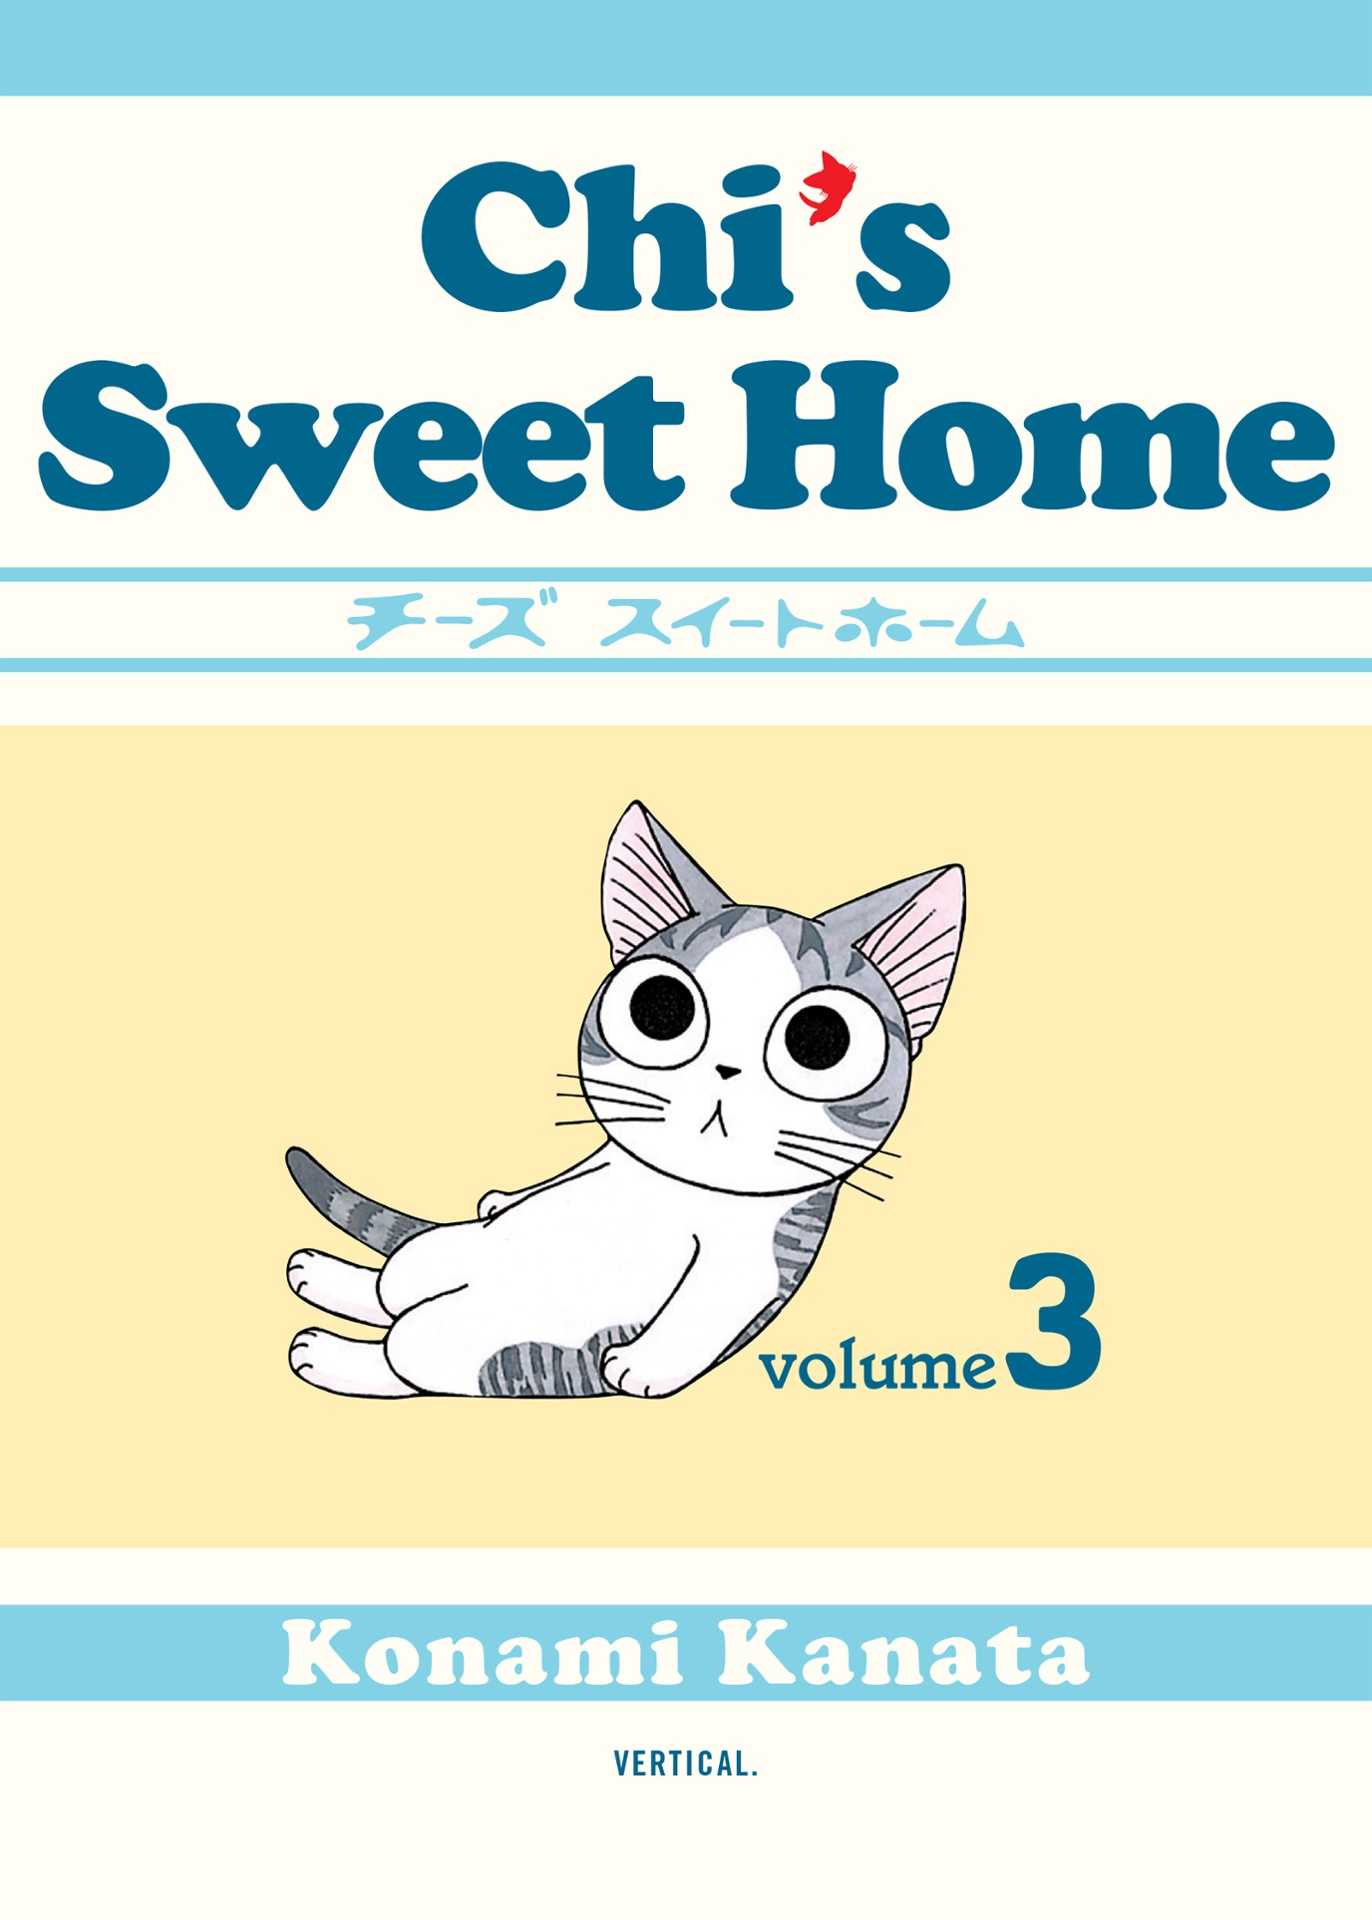 Chi's Sweet Home | Chi's Sweet Home Wiki | Fandom